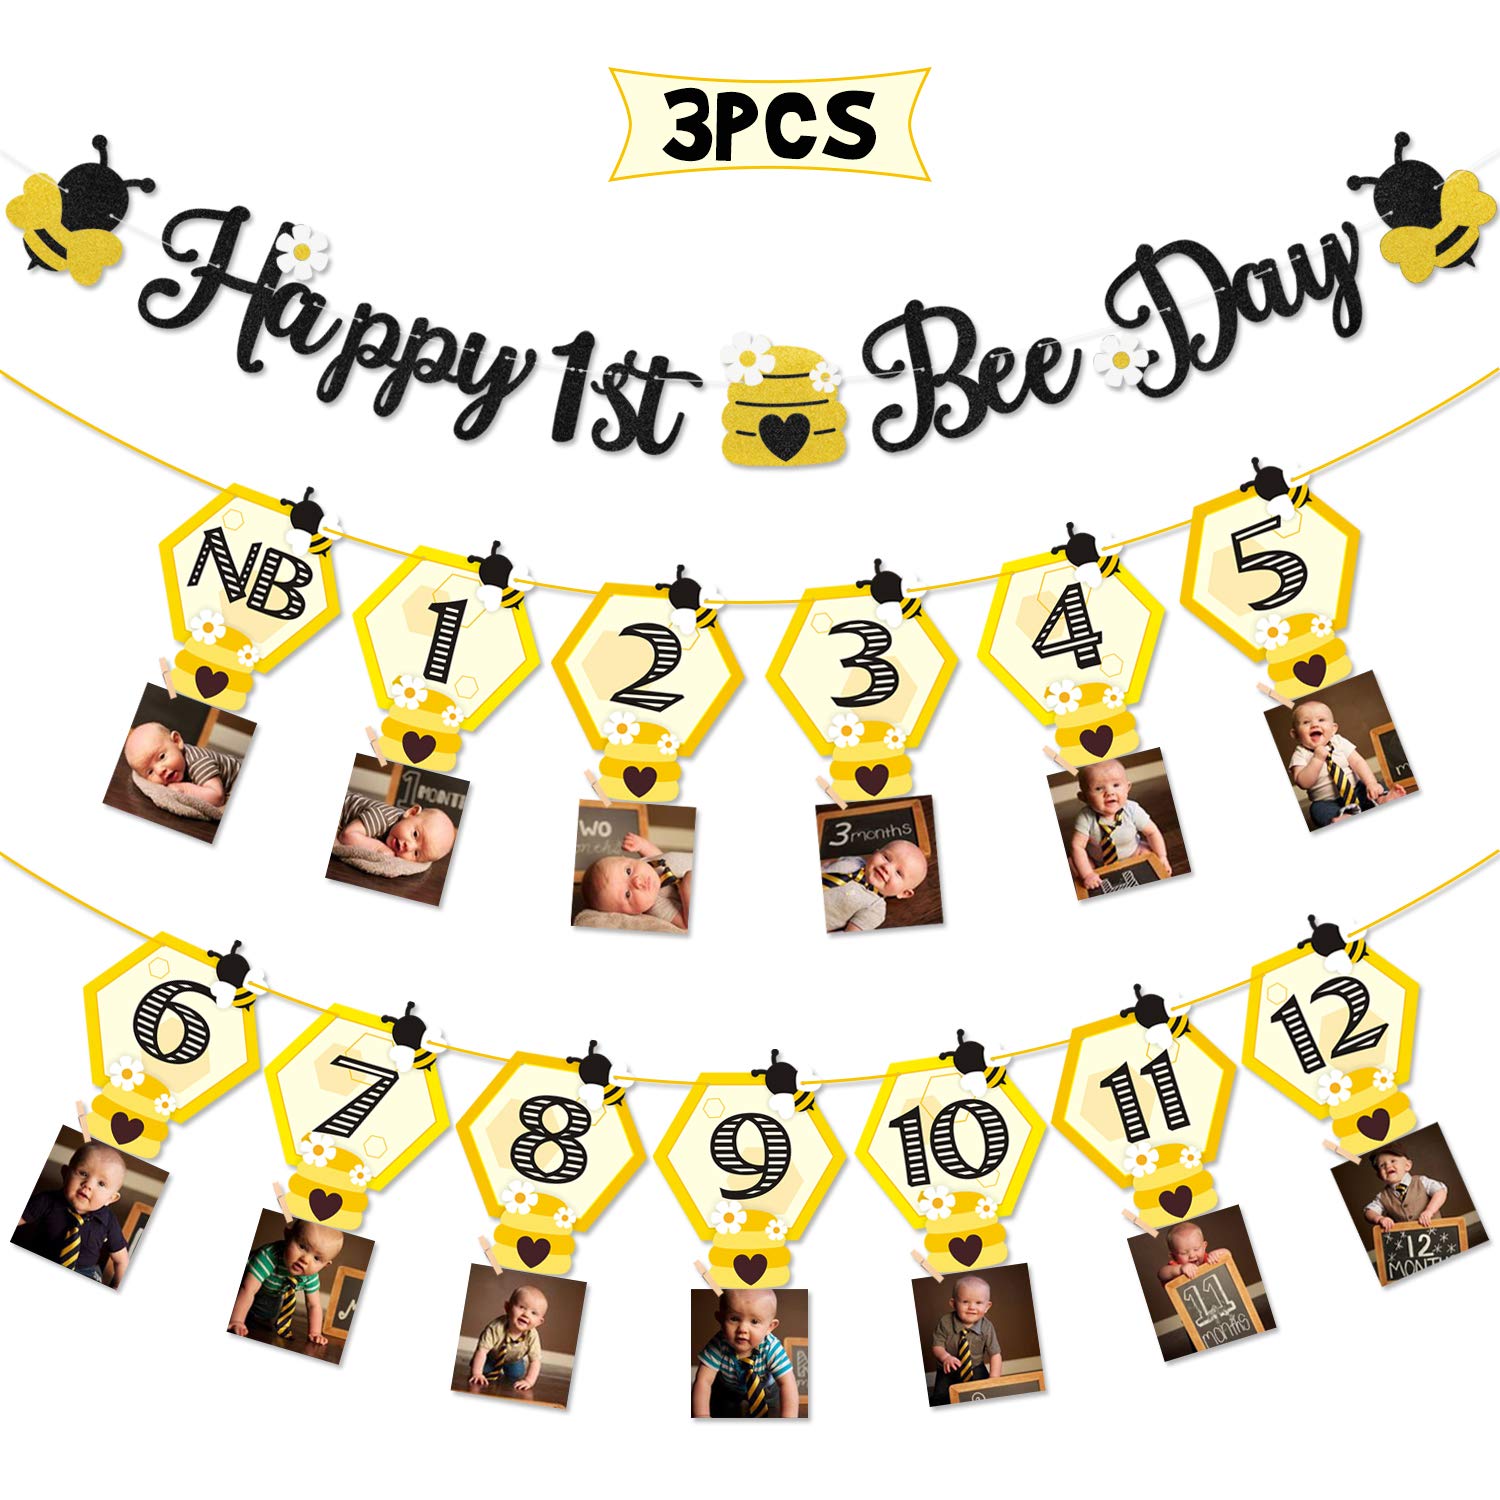 3PCS Happy Bee Day Party Decorations, Bumble Honey Bee 1st Birthday Baby Photo Banner for Newborn to 12 Months, Monthly Milestone Photograph Bunting Garland, First Birthday Celebration Decorations